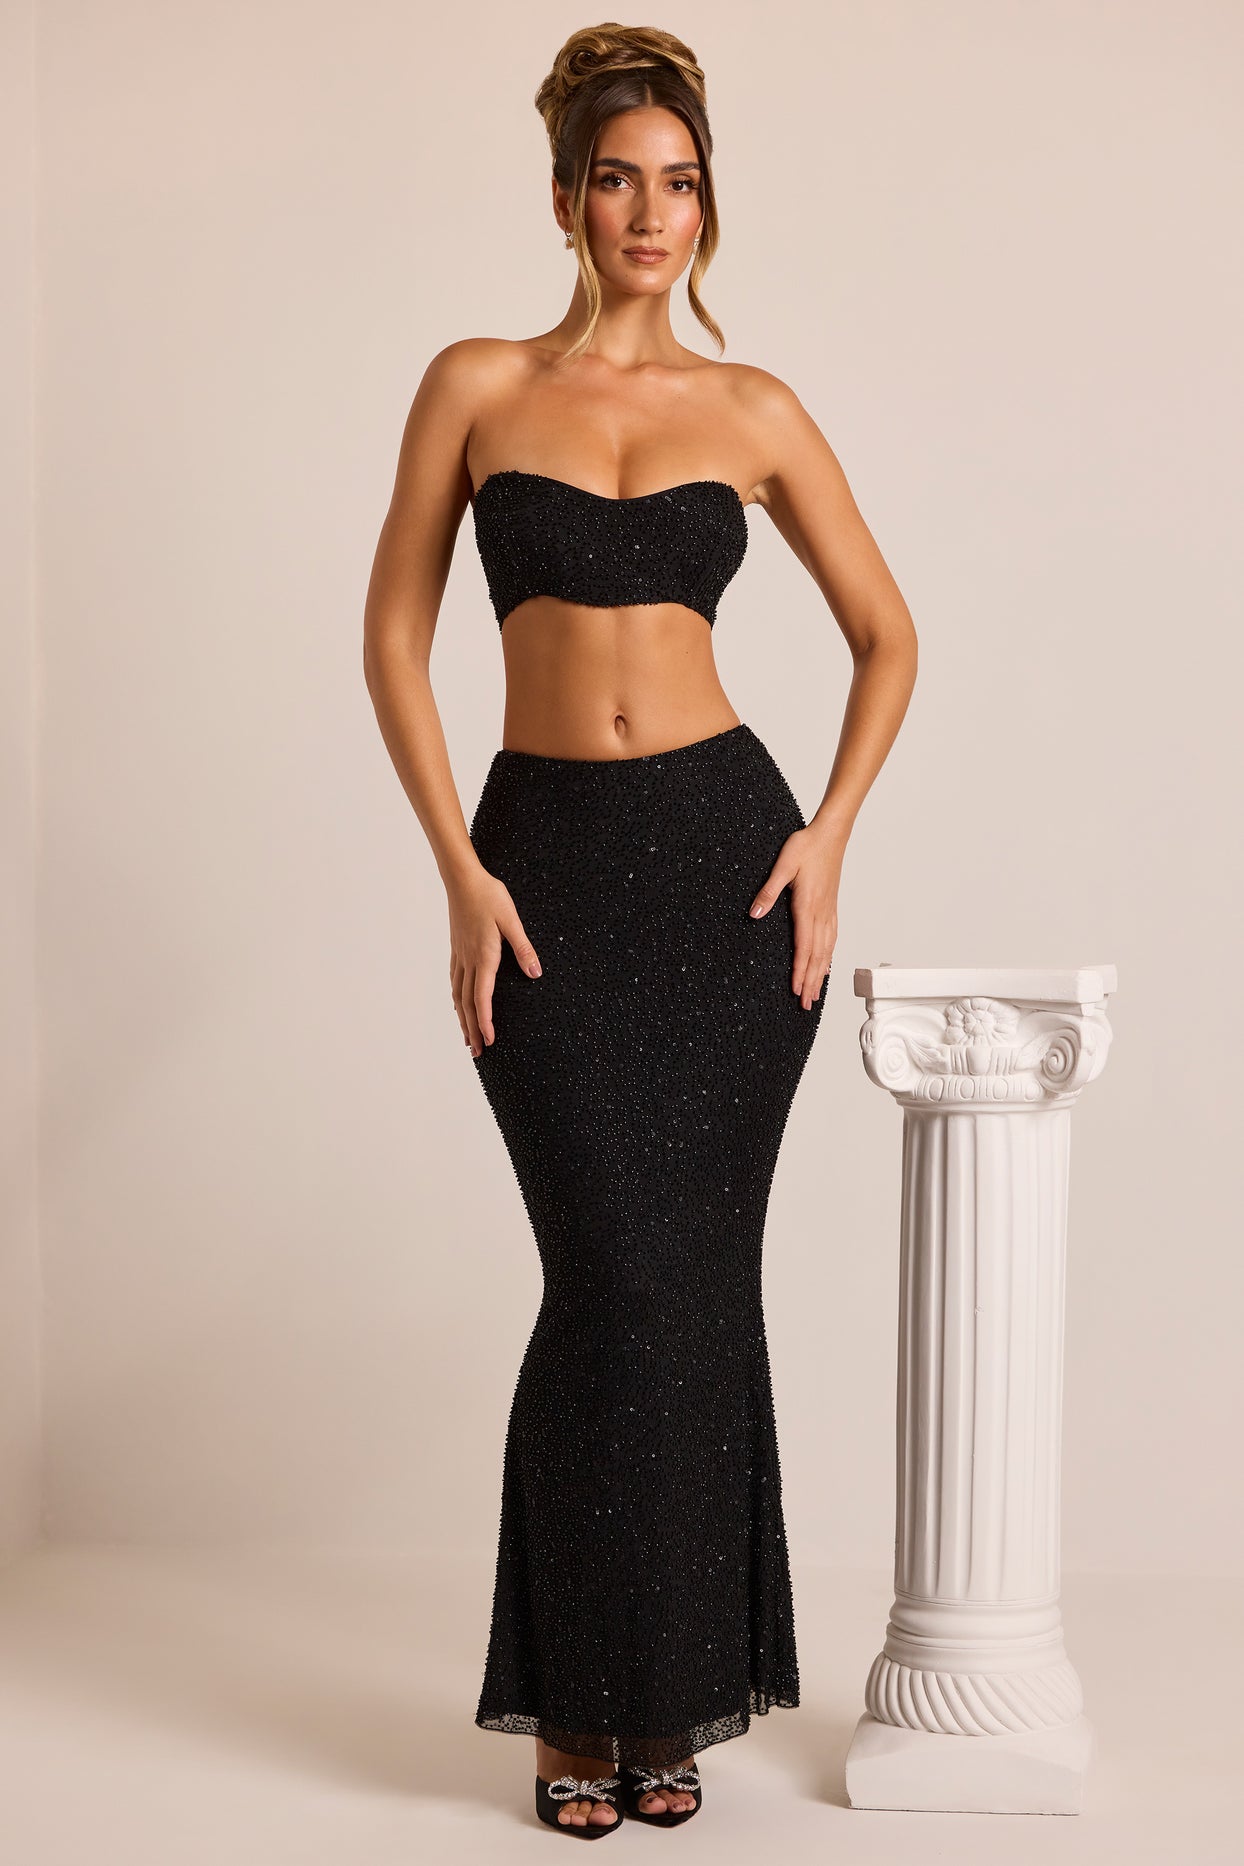 Embellished Mid-Rise Maxi Skirt in Black